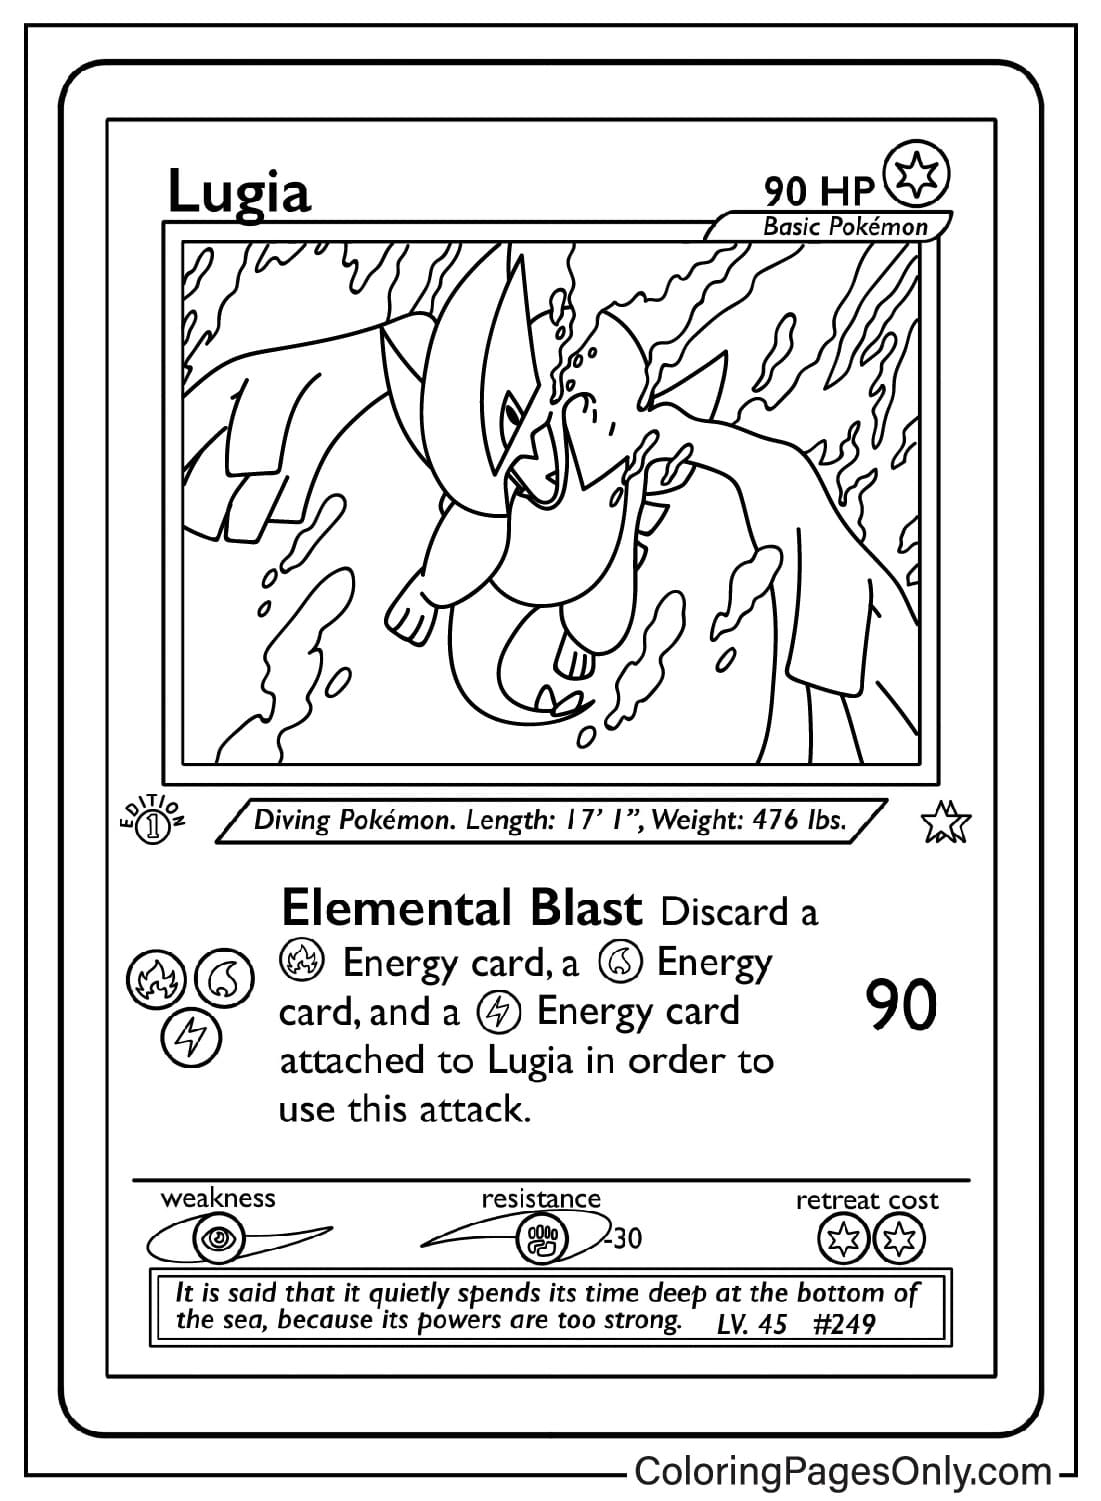 Lugia Card Coloring Page from Pokemon Card